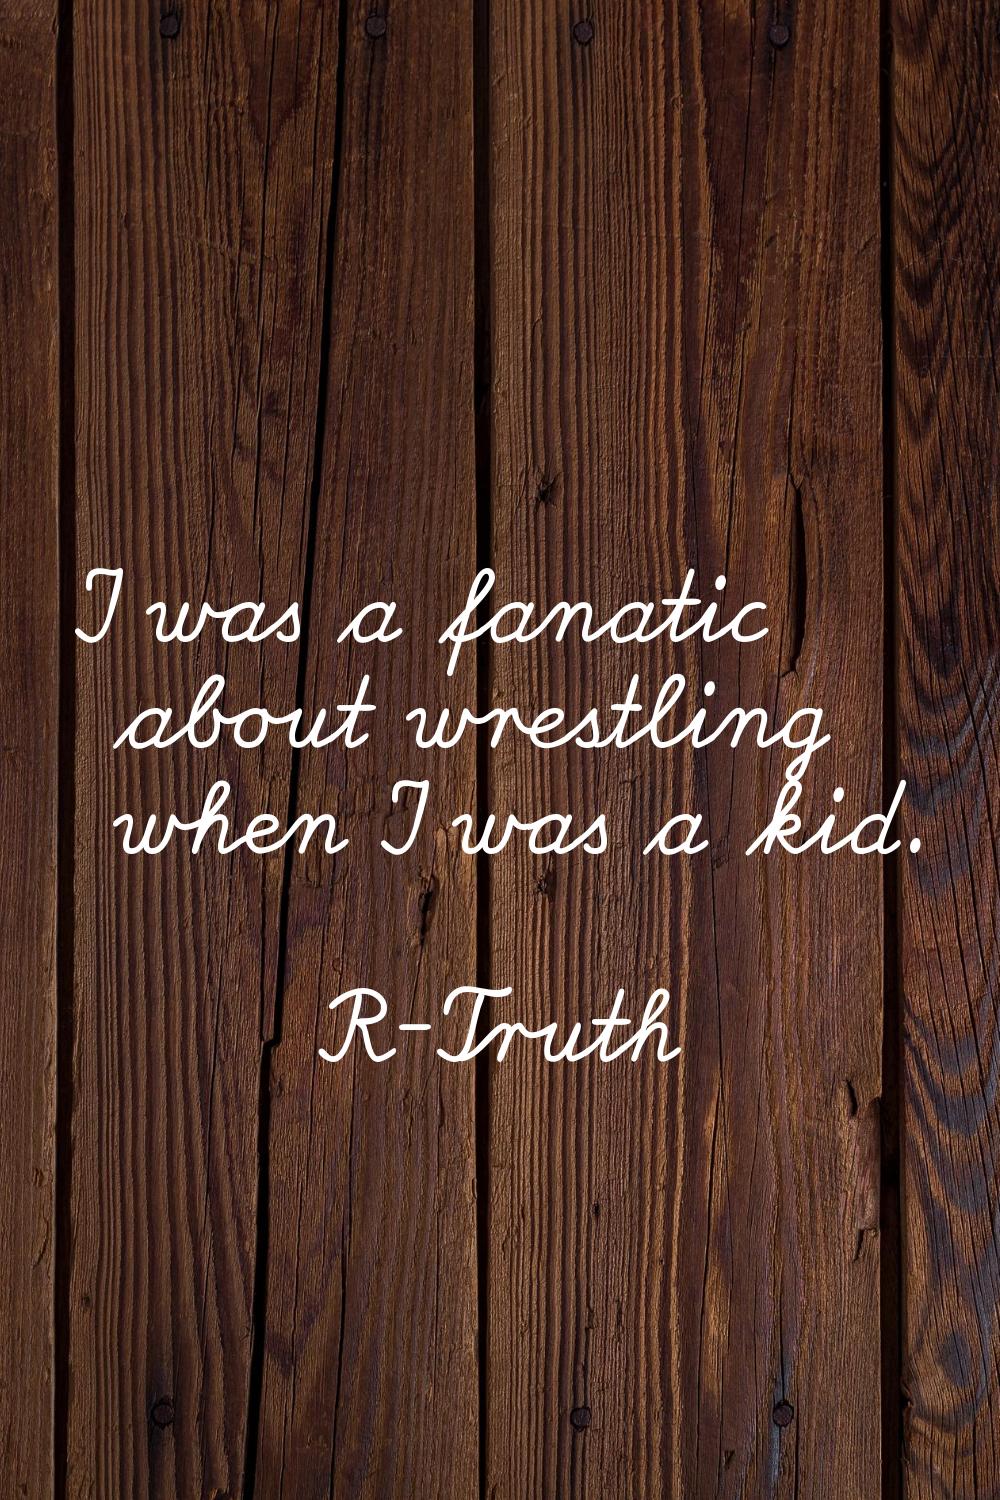 I was a fanatic about wrestling when I was a kid.